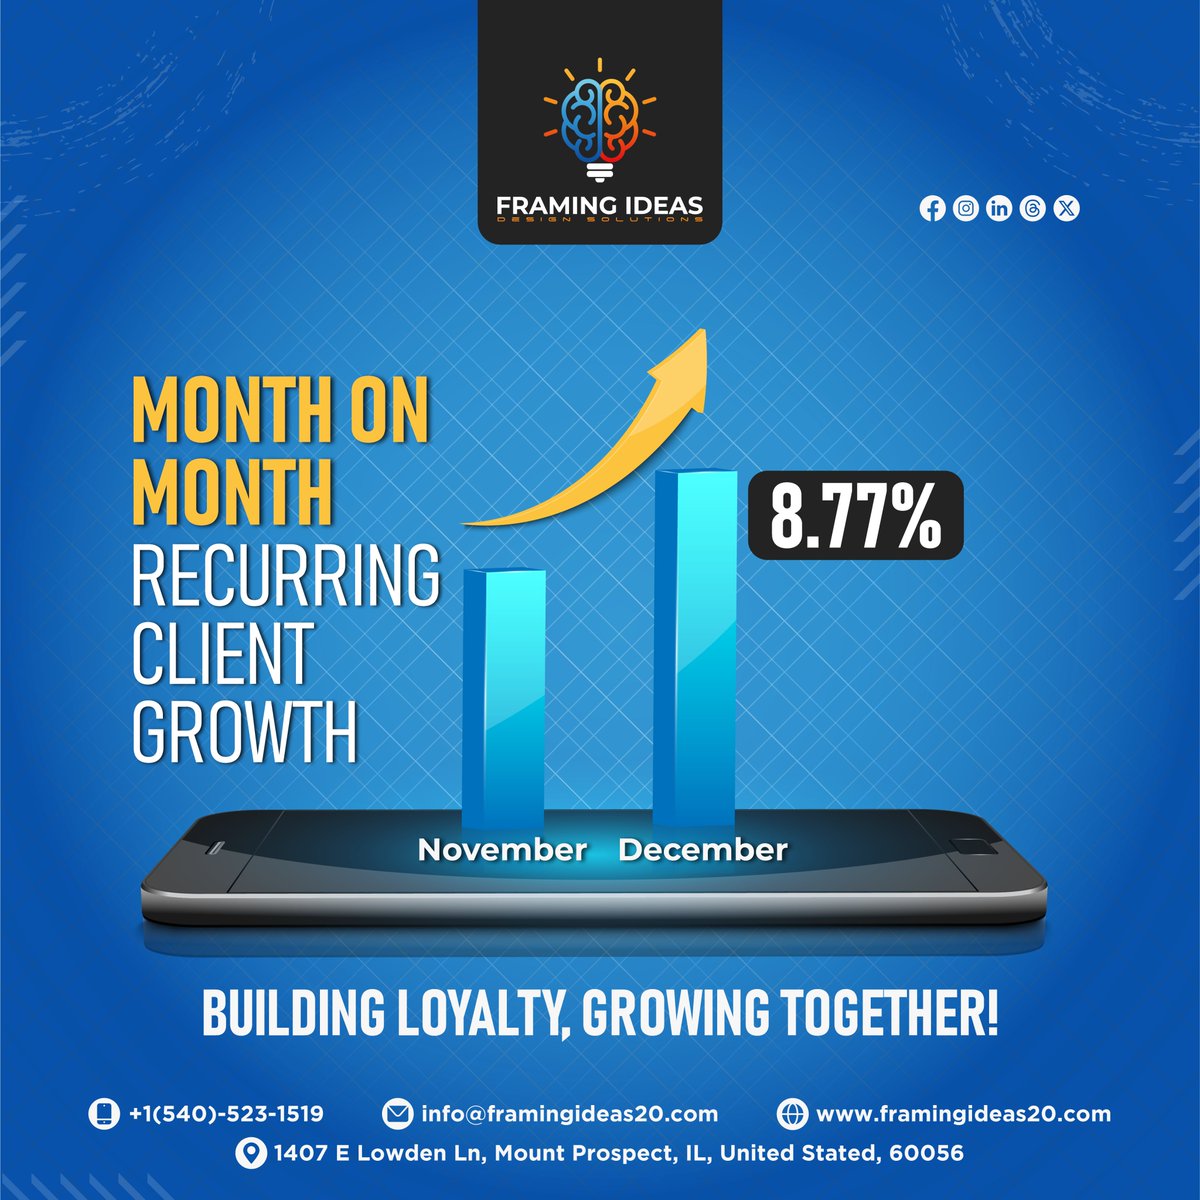 Our company's Month on Month Recurring Client Growth is hitting new peaks! 🚀

#framingideas #framingideas20 #DesignAgency #BrandingAgency #ClientSuccess #GrowthMomentum #LoyalPartnerships #ReliablePartners #BusinessExcellence #BusinessSuccess #businessowner #CEO #entrepreneur